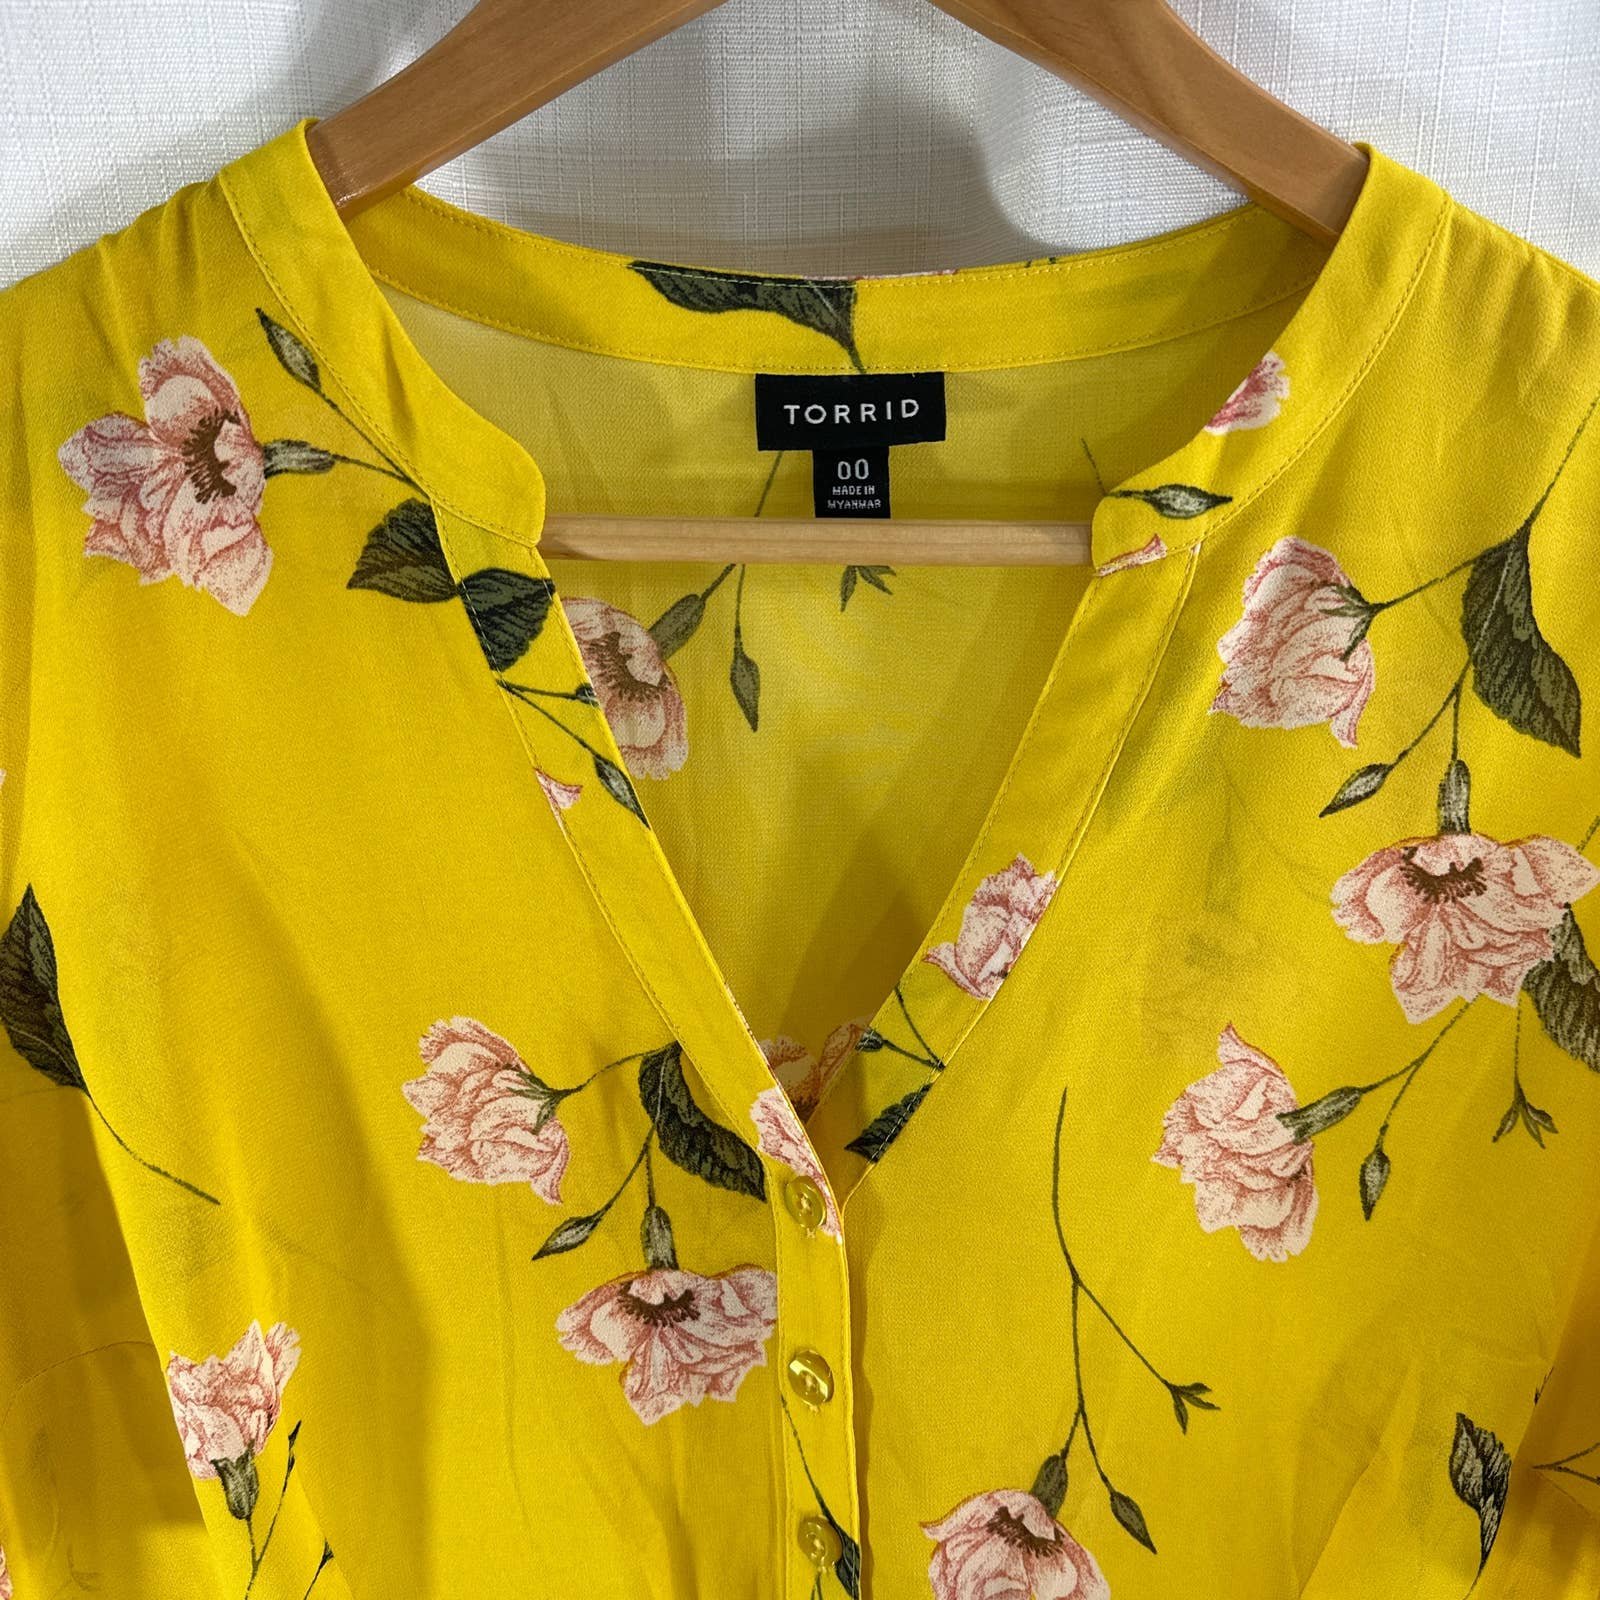 Latest  Torrid Yellow Floral Button Semi Sheer Chiffon Babydoll High Low Tunic Top 0X K6BoDxkaM just for you